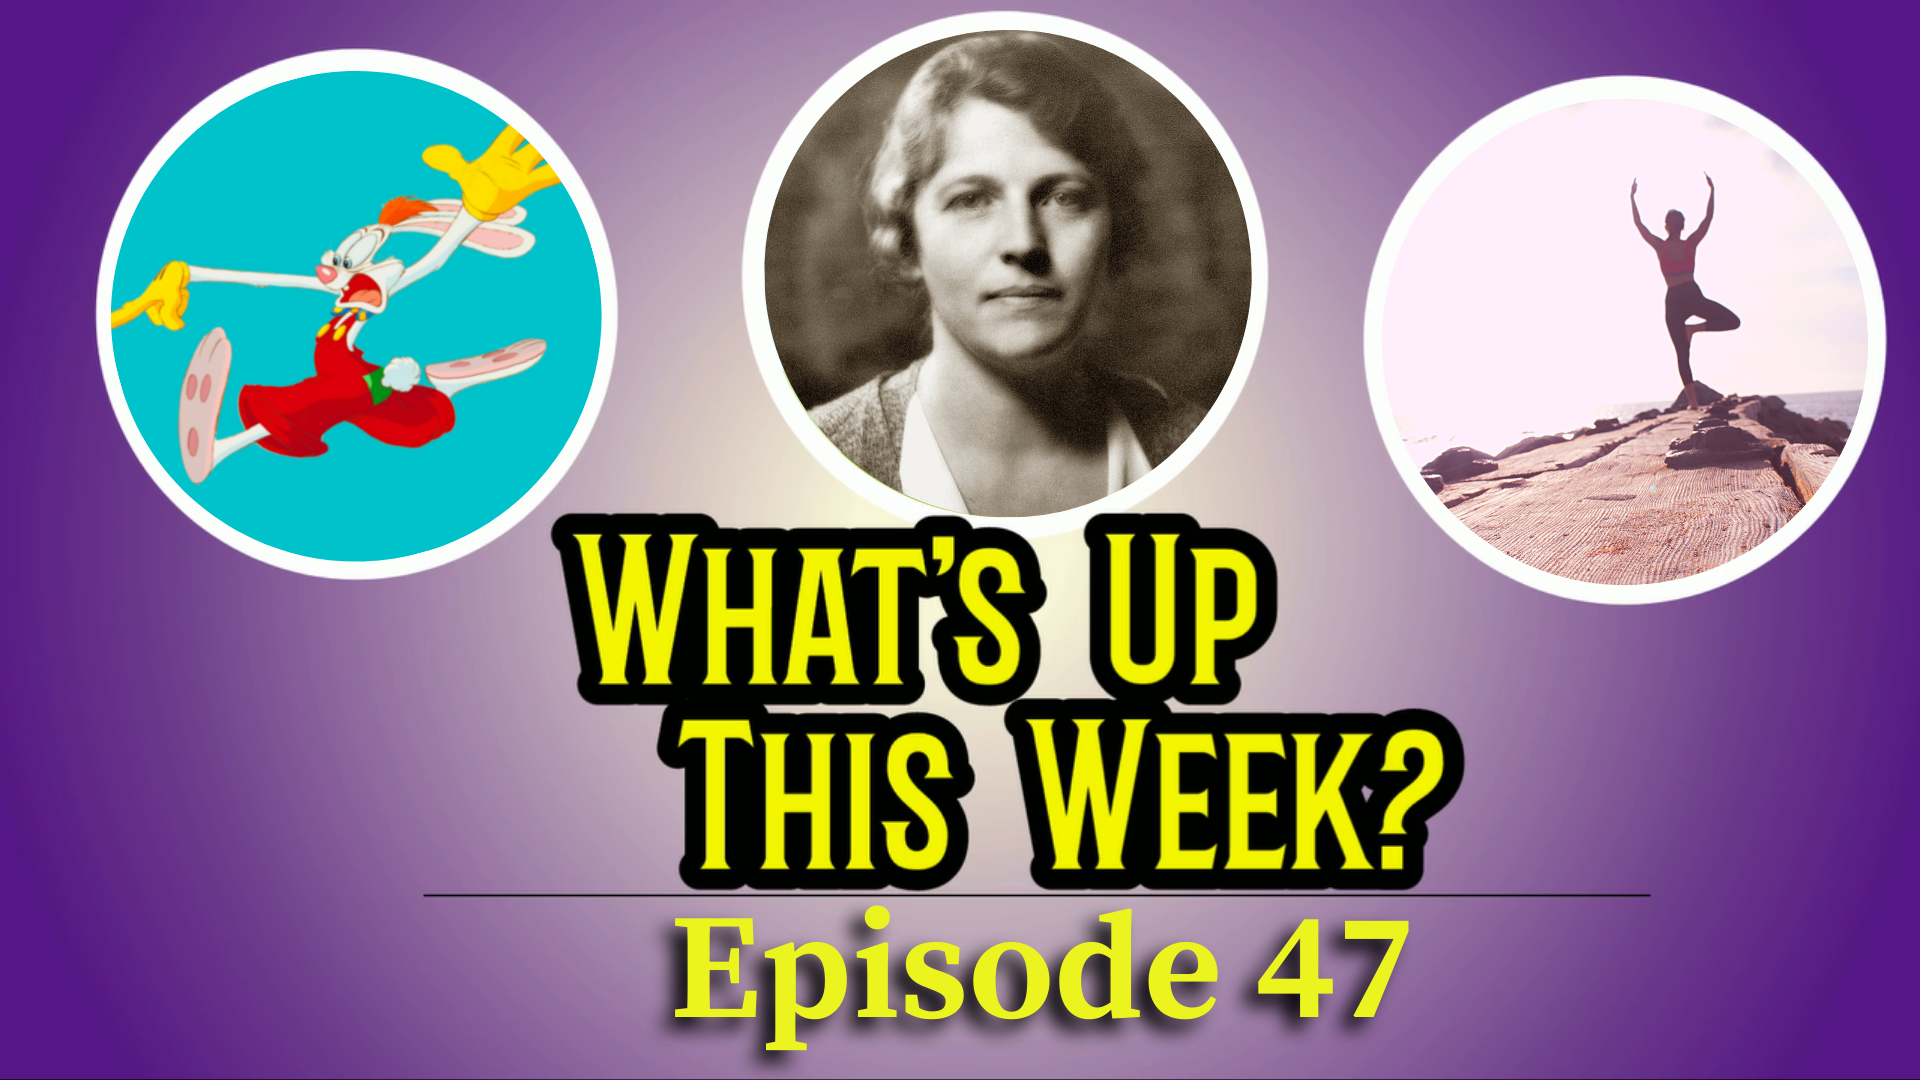 Text: What's Up This Week? Episode 47. 3 images in circles: Roger Rabbit, Pearl S. Buck, and a person doing yoga